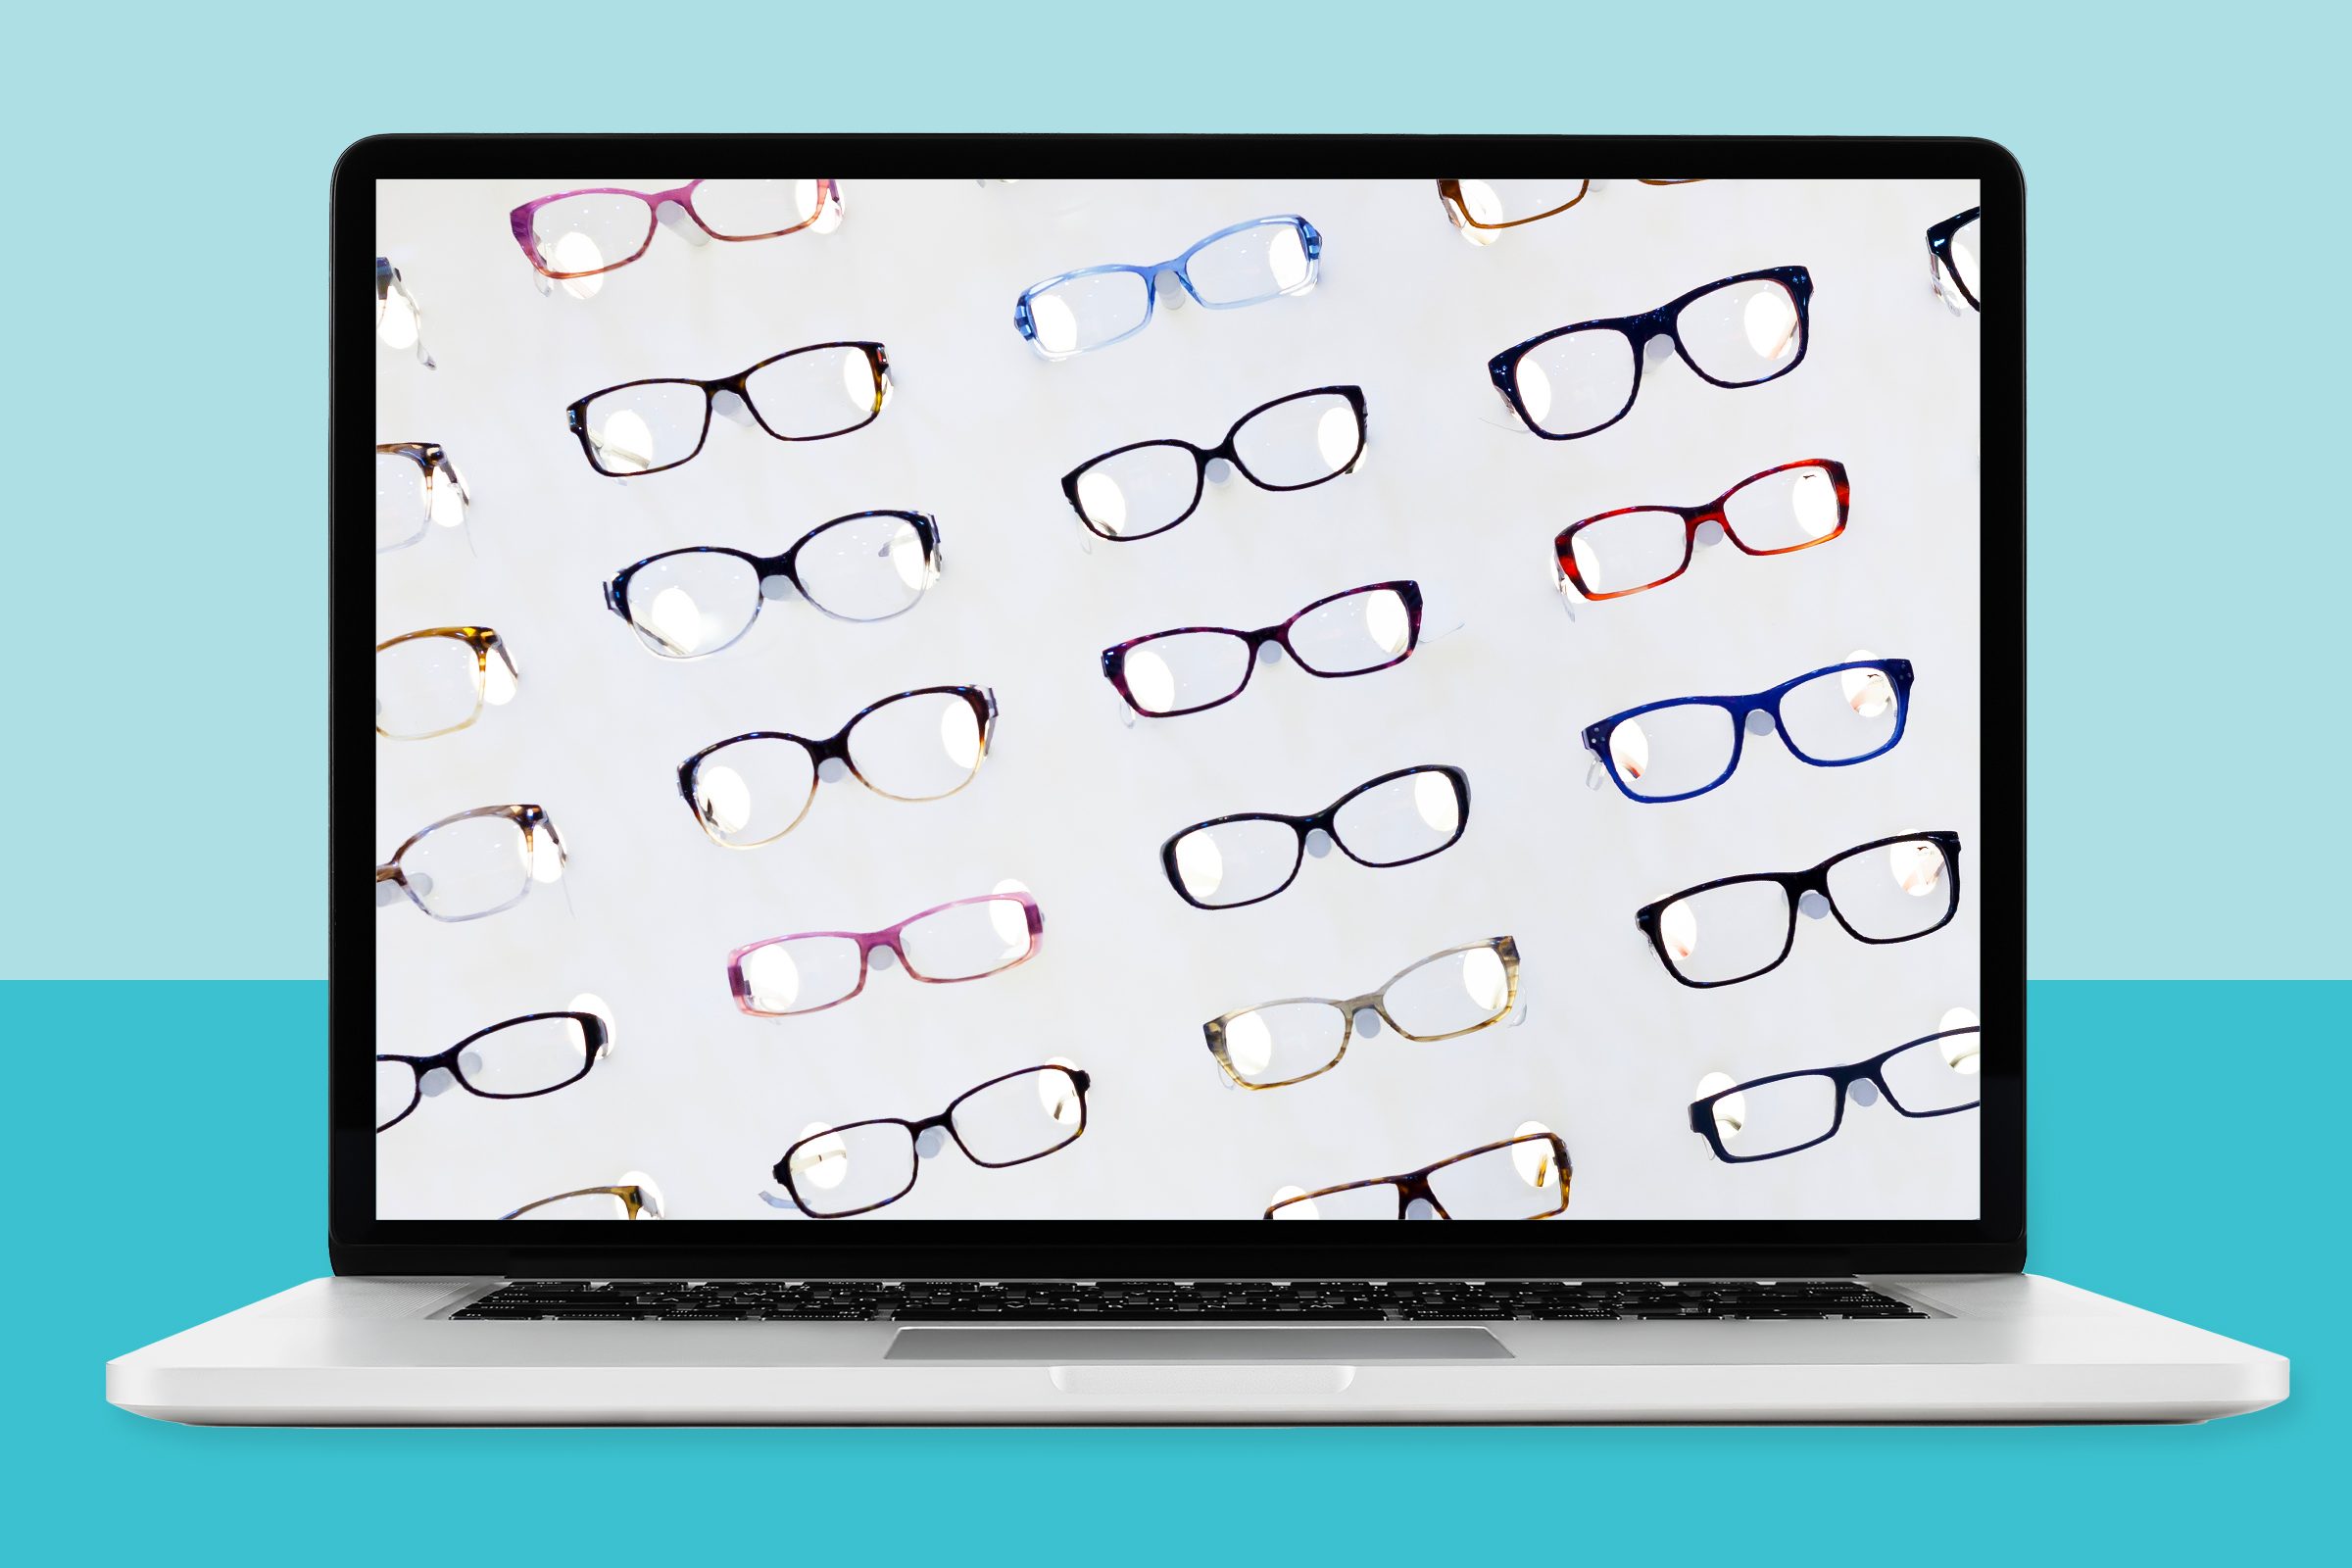 Different styles of glasses in a pattern displayed on a laptop